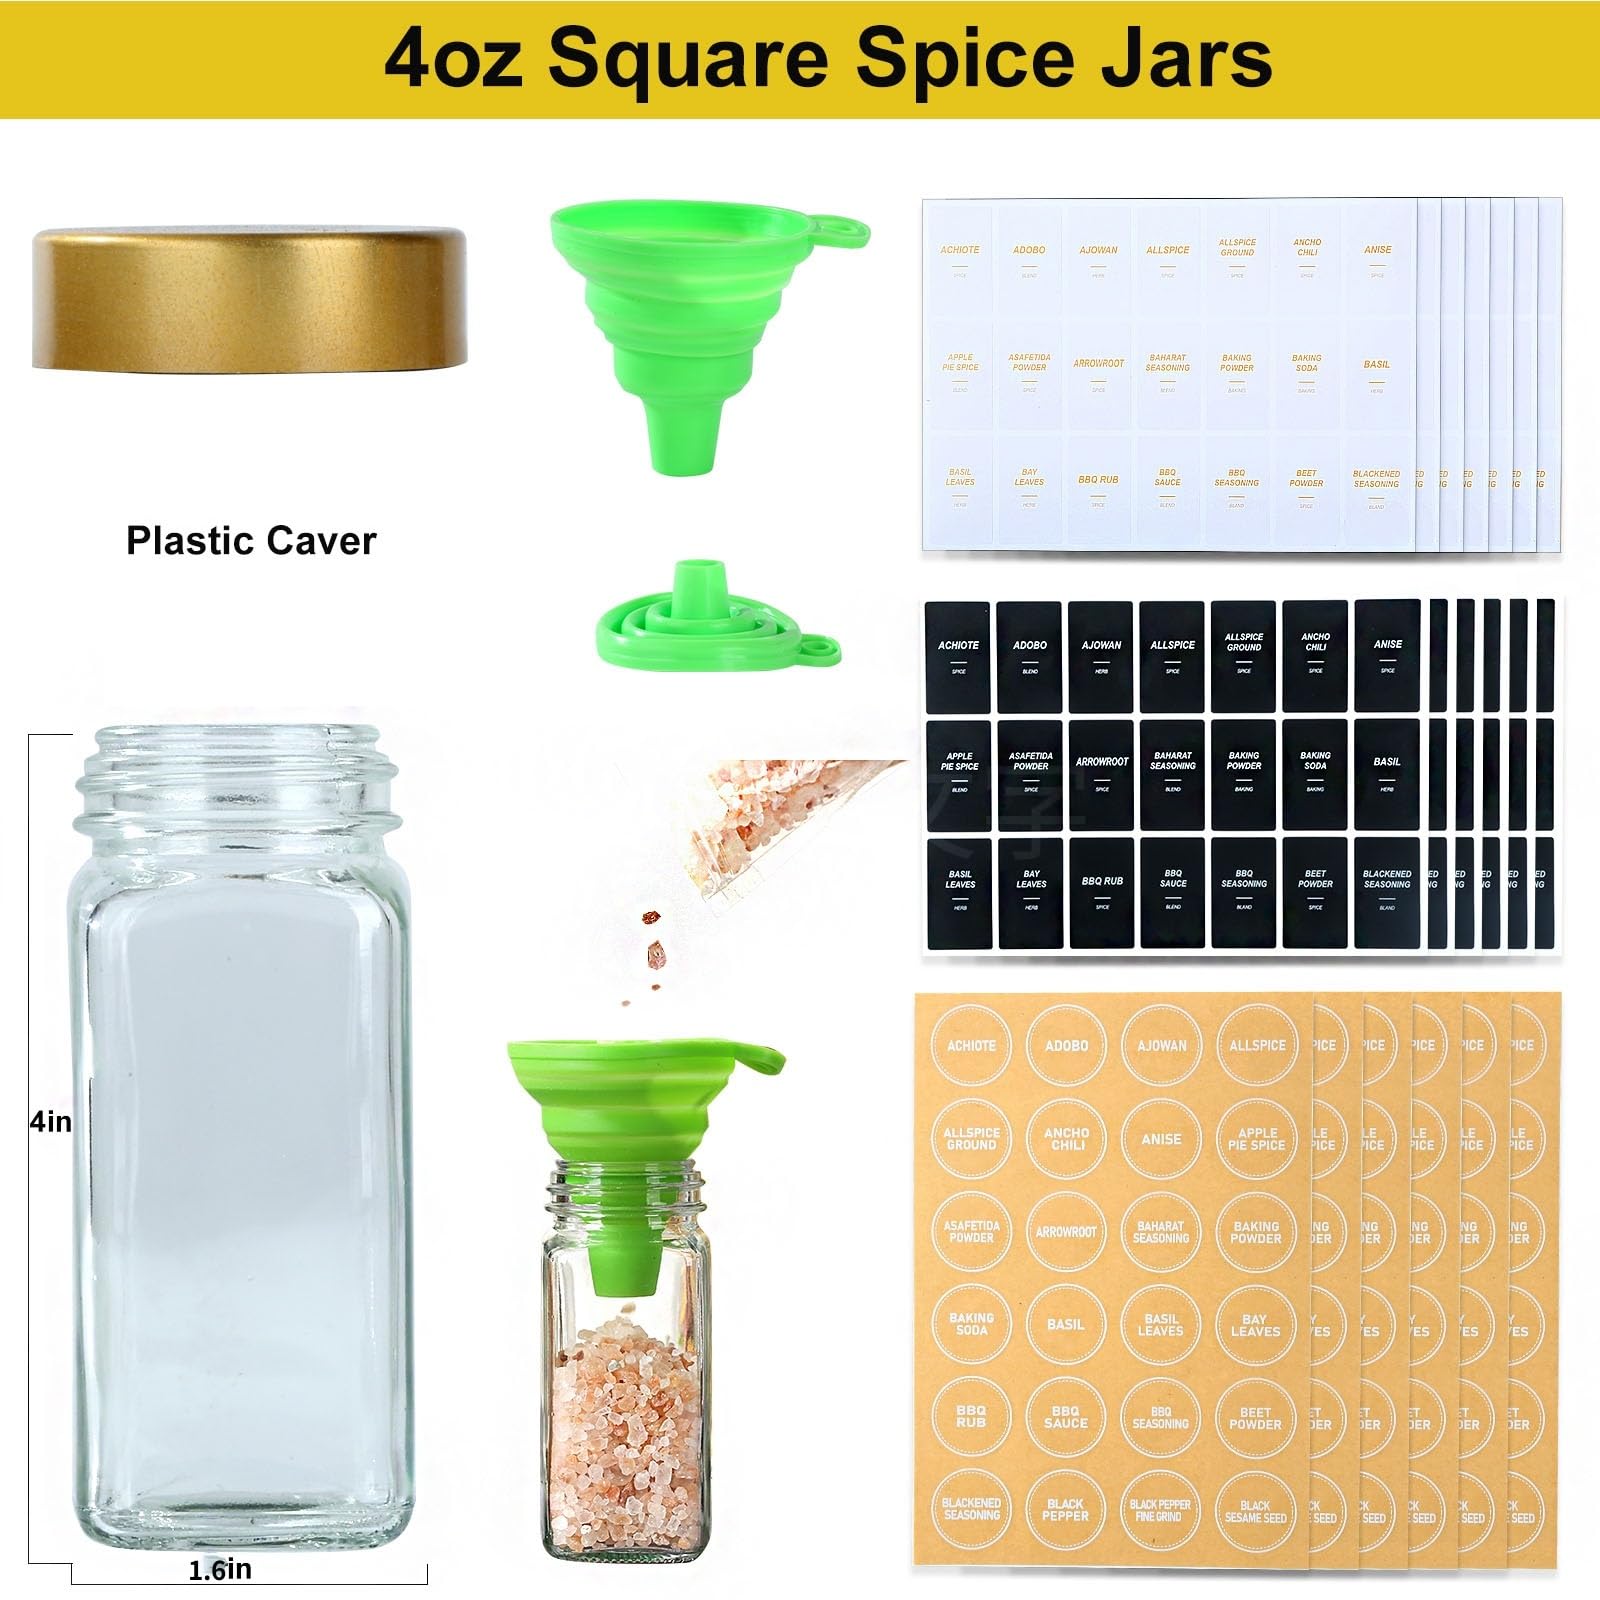 JARXSUN Glass Spice Jars with Label, 24Pcs Spice Jars with Shaker Lids-4 oz Gold Spice Seasoning Jars Bottles Containers Set for Spice Rack (24)